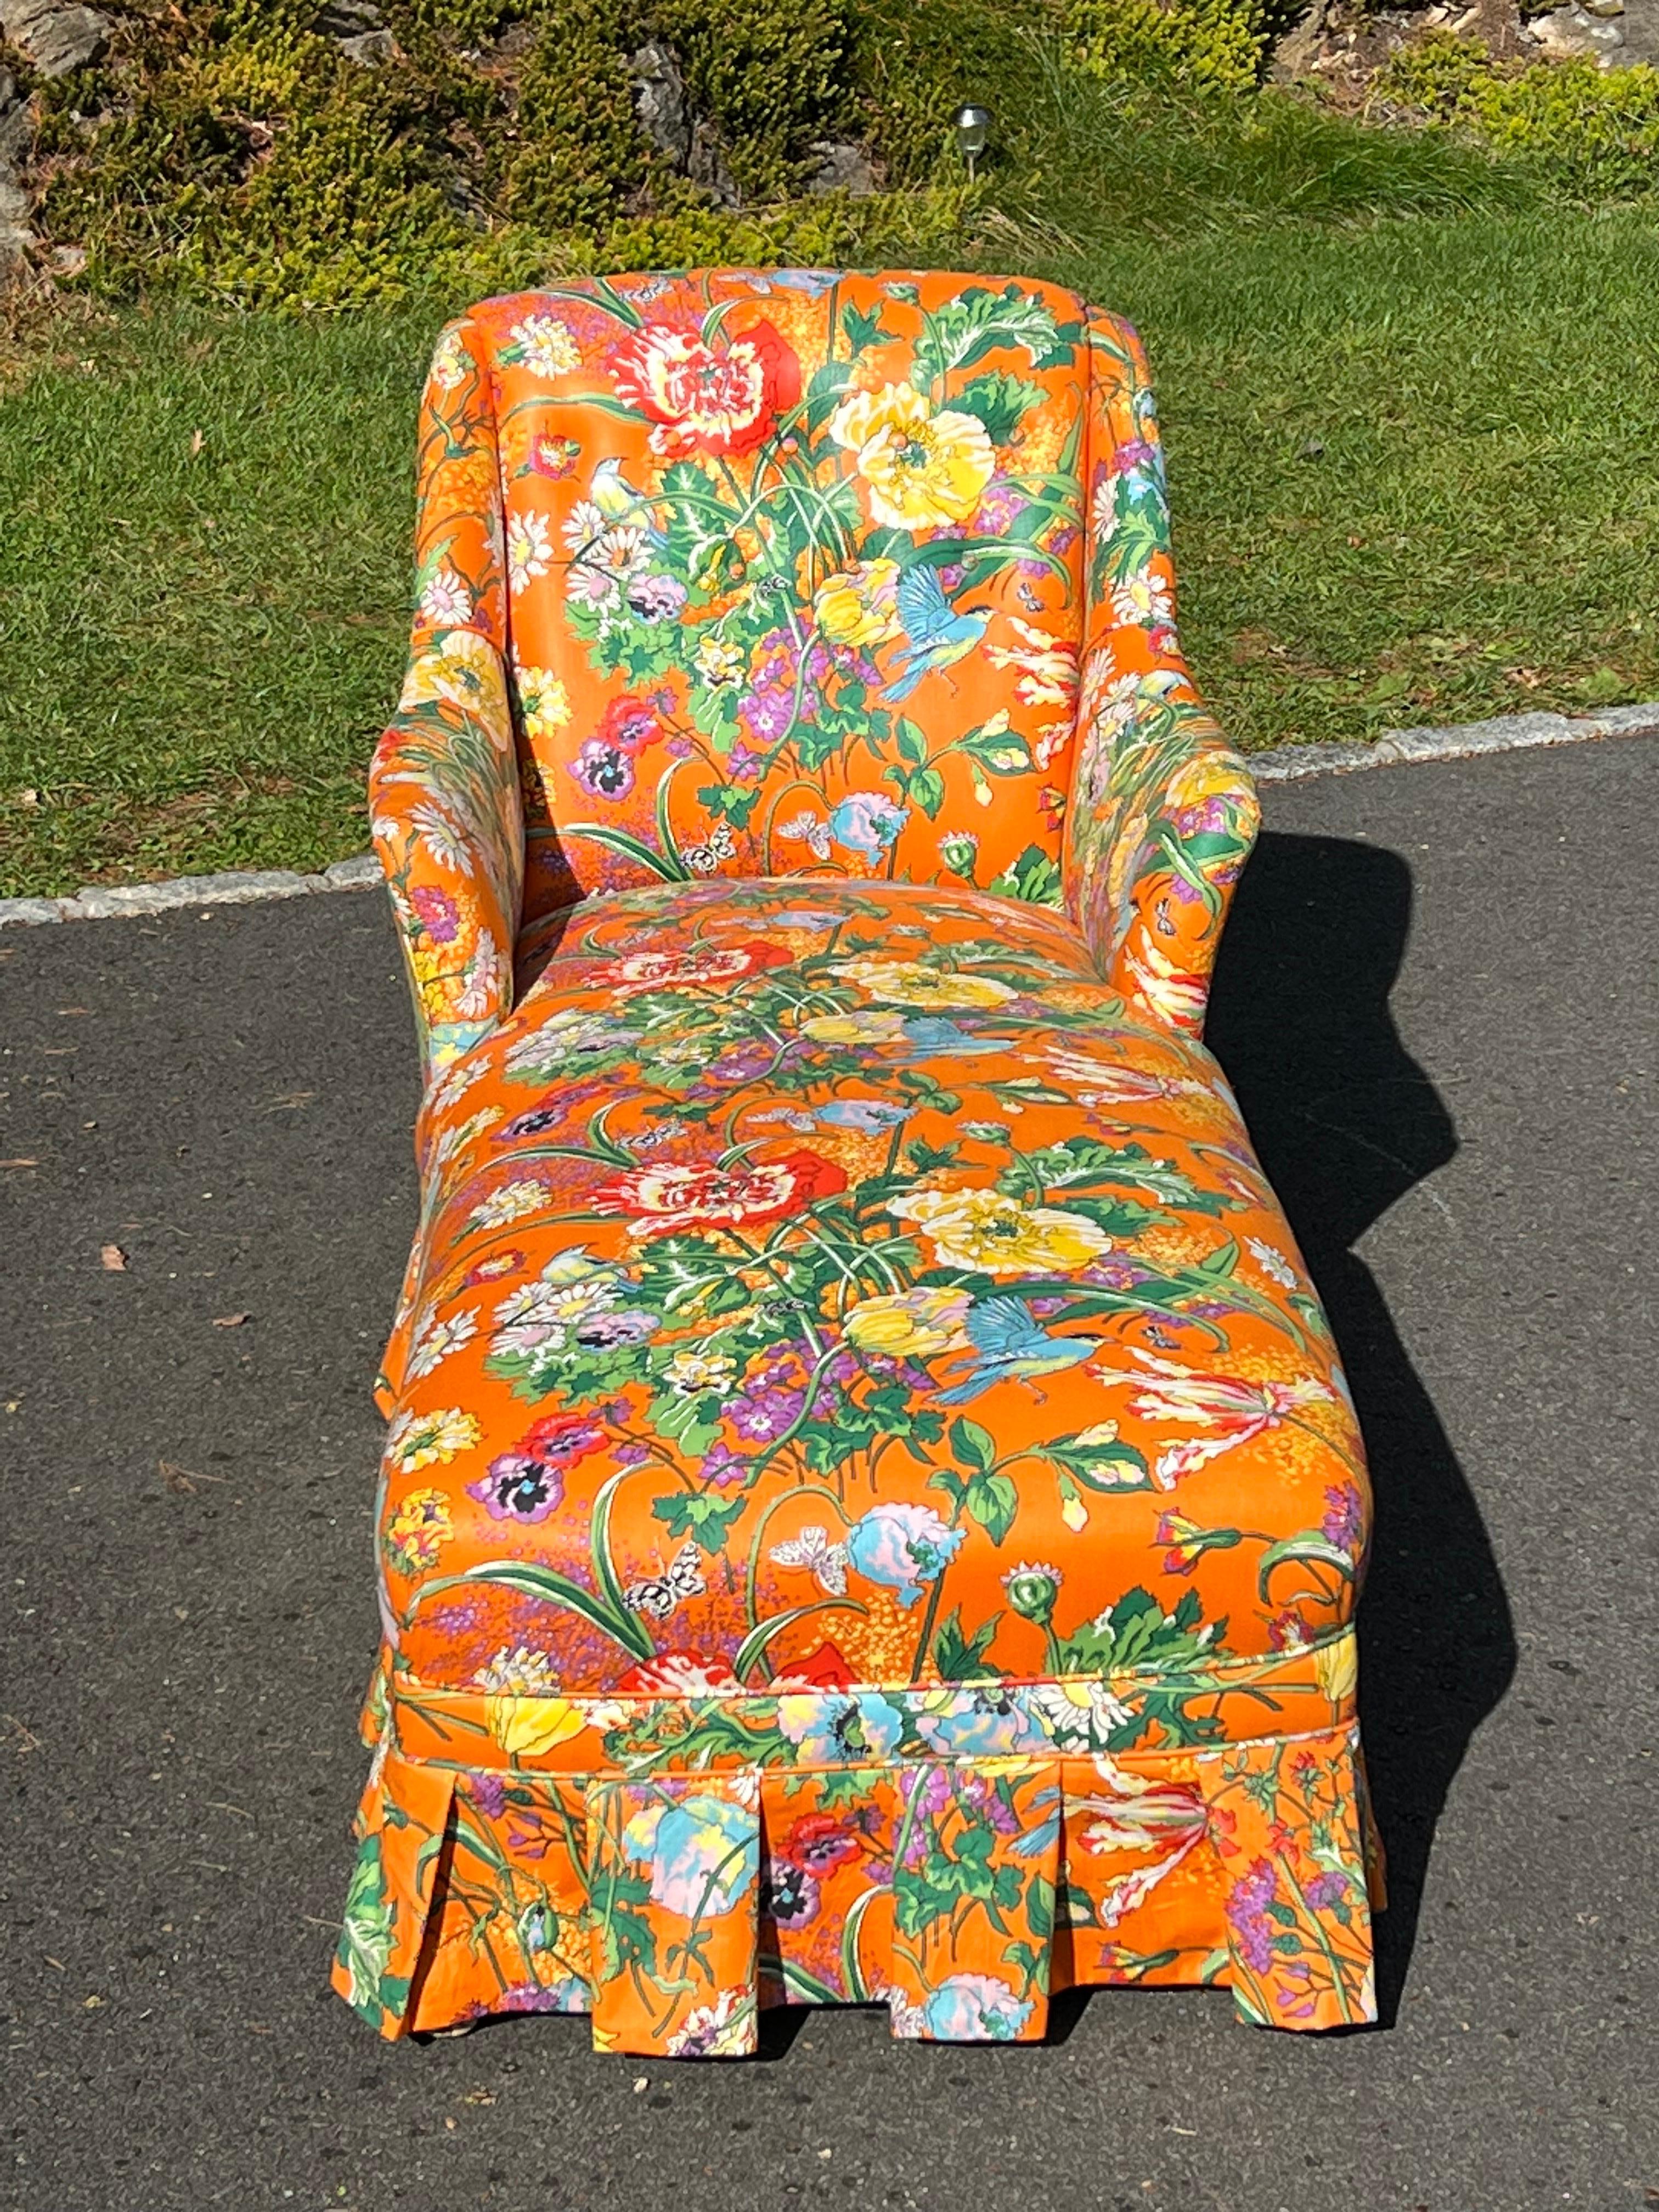 Retro Floral Chaise Lounge in Orange In Excellent Condition For Sale In Redding, CT